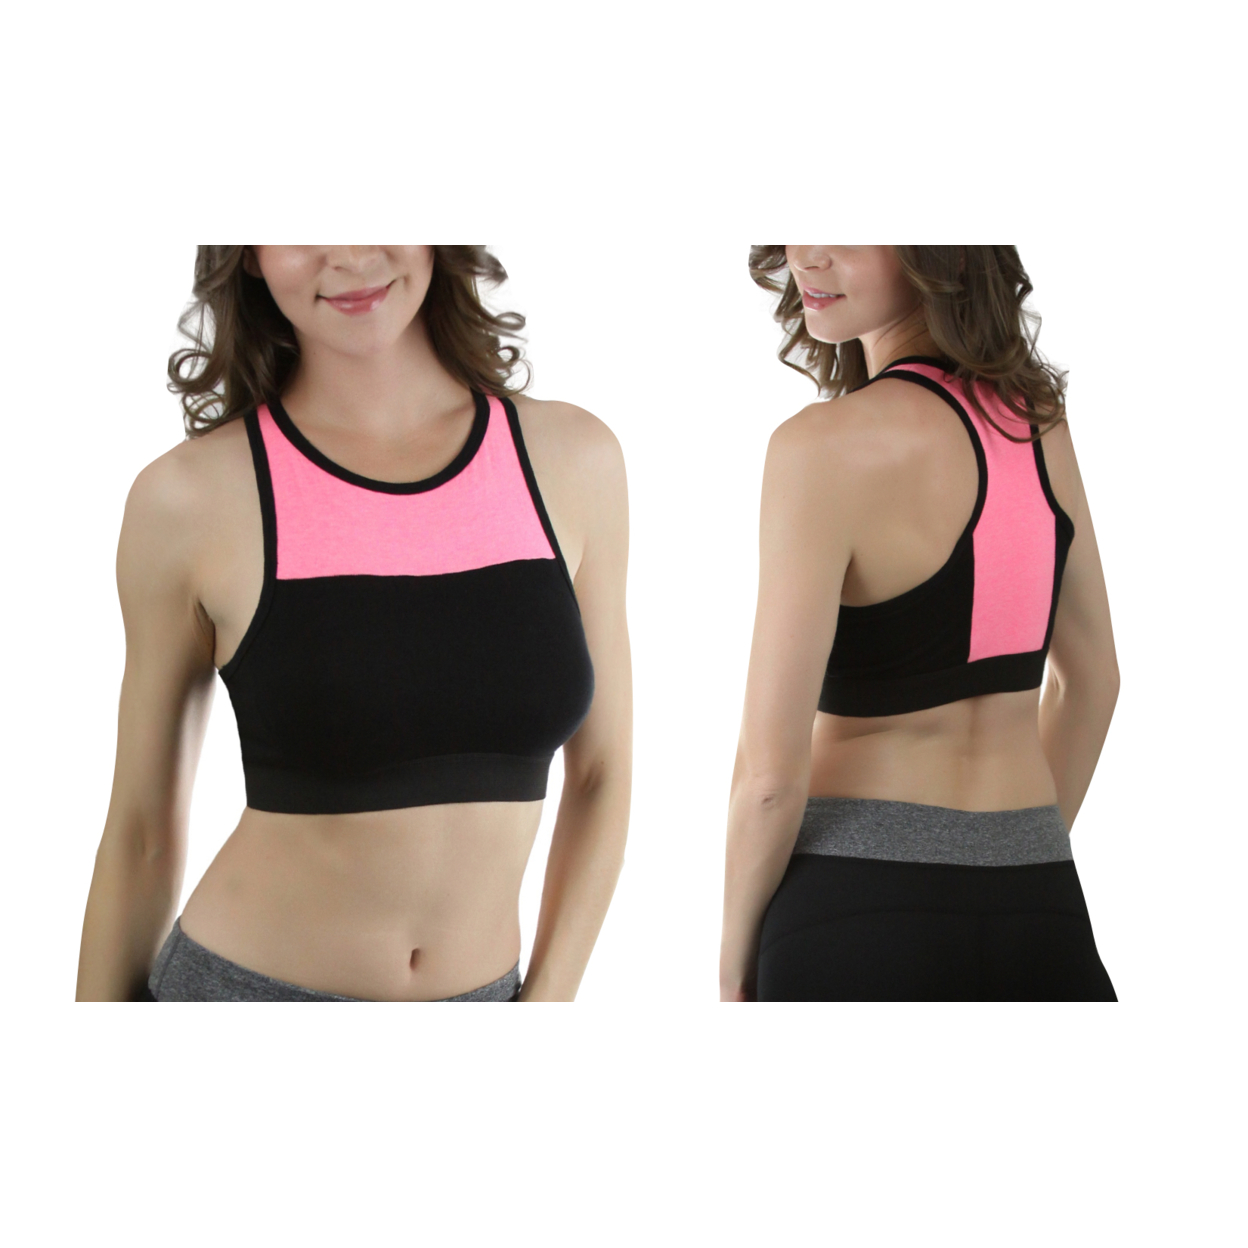 Single Or 2-Pack Of Women's Color-Block Two Tone Cotton-Blend Bra - Black/Neon Pink, Medium